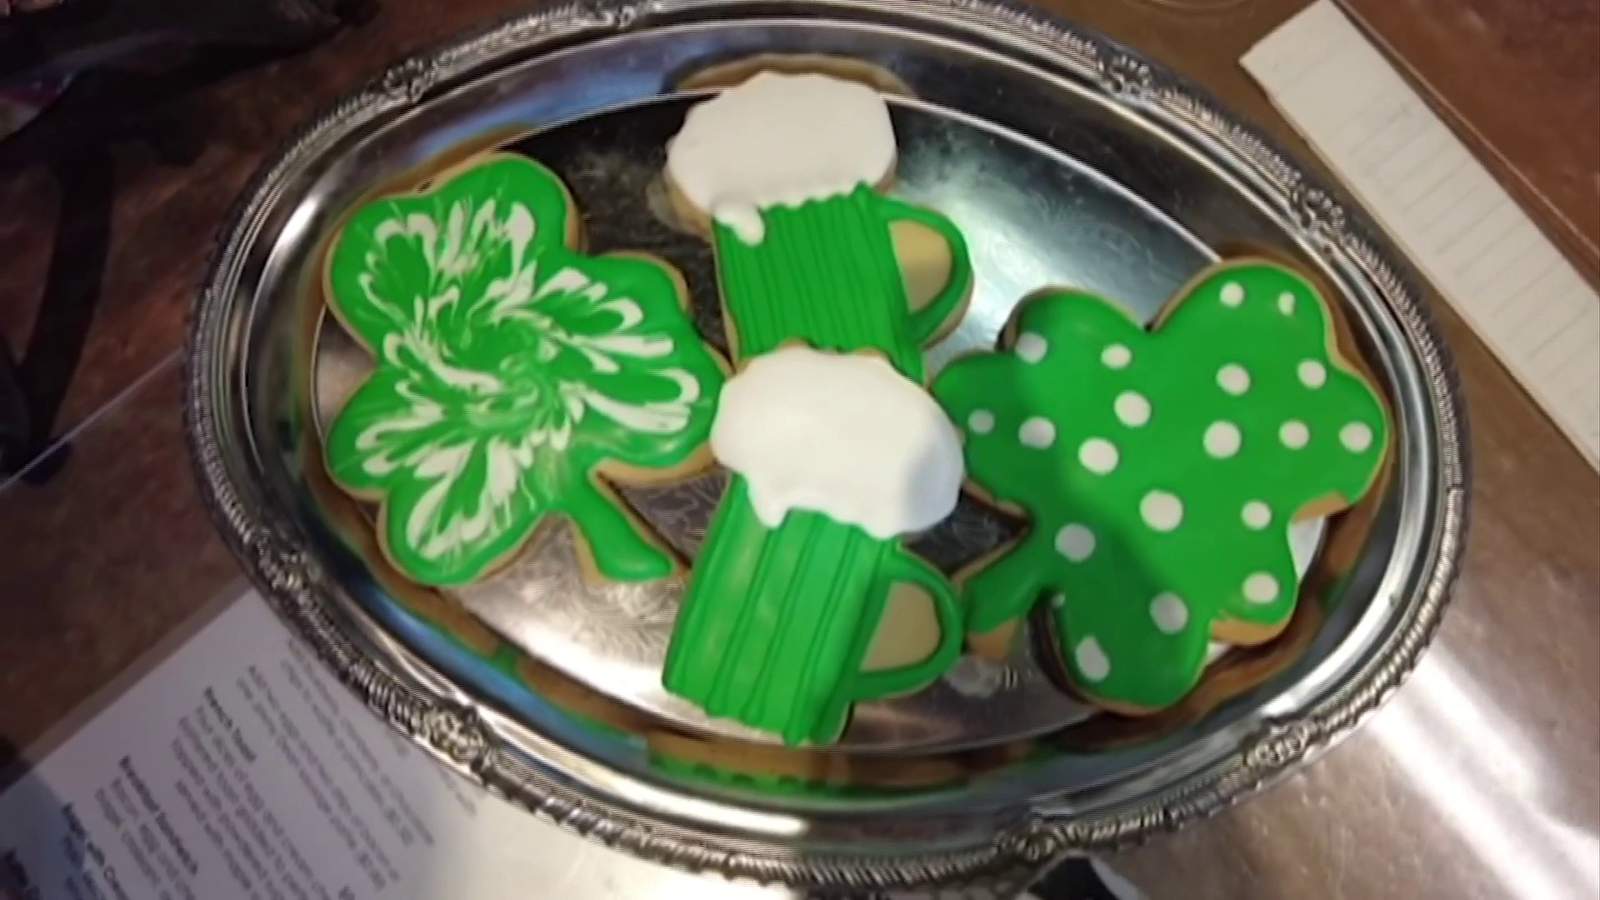 Celebrating St. Patrick’s Day with traditional Irish food